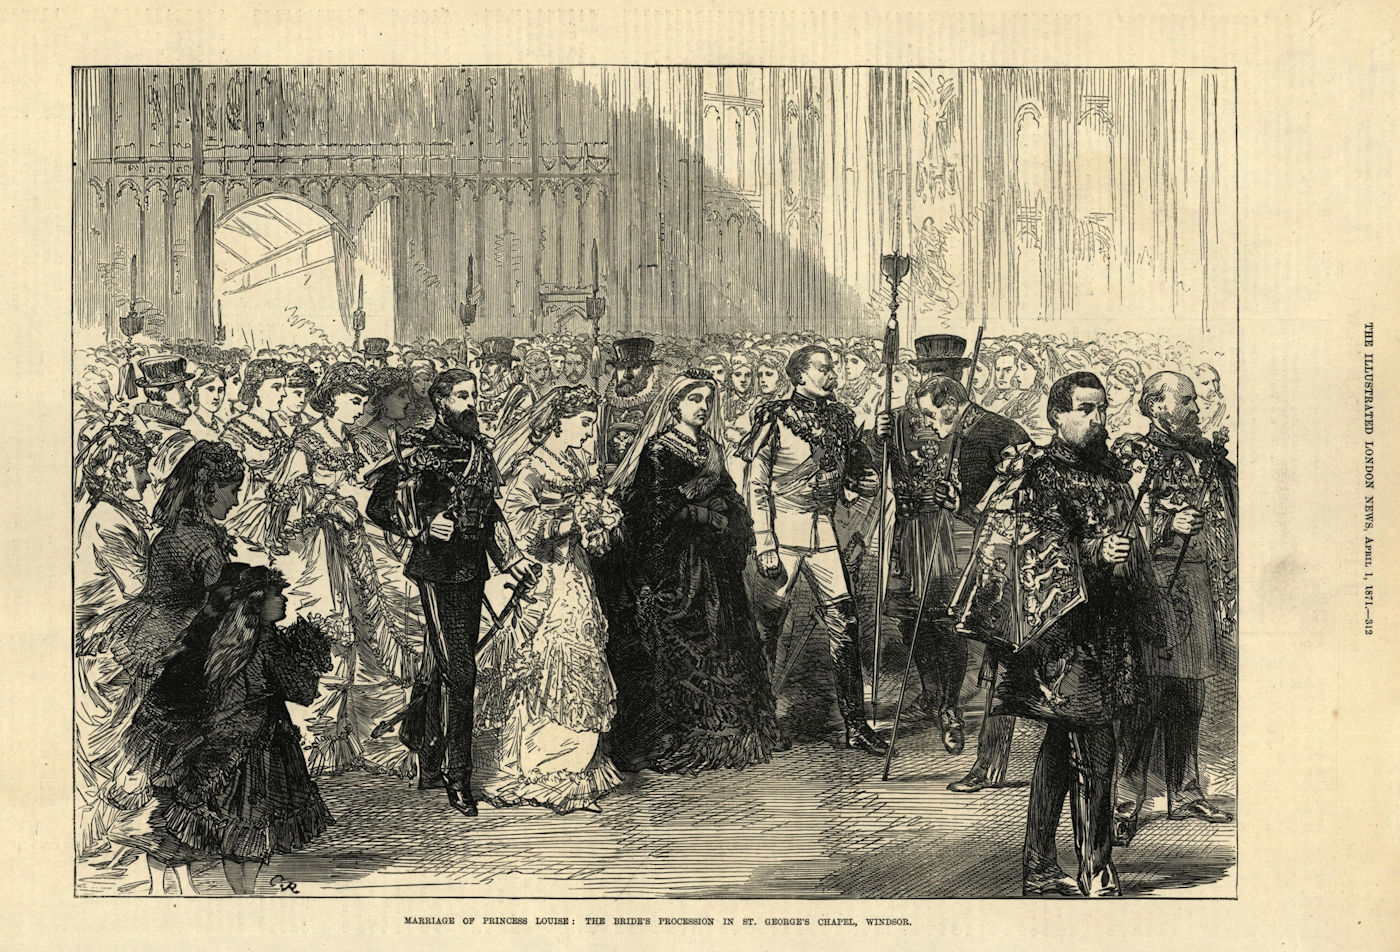 Associate Product Marriage of Princess Louise. Bridal procession St. George's Chapel Windsor 1871